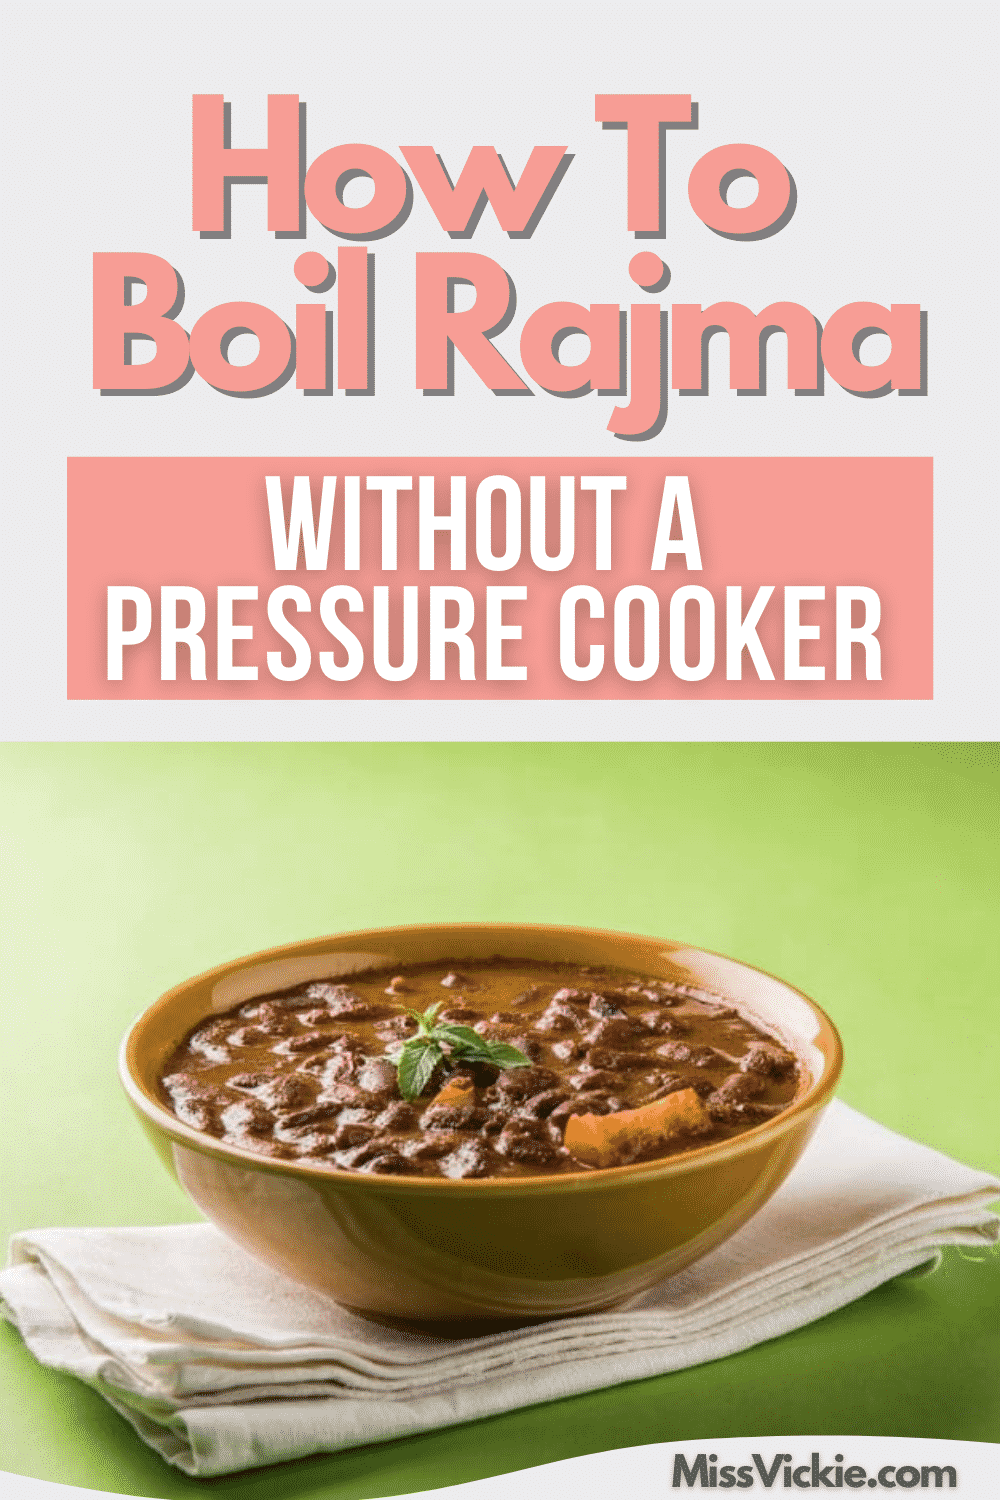 How To Boil Rajma Without Pressure Cooker